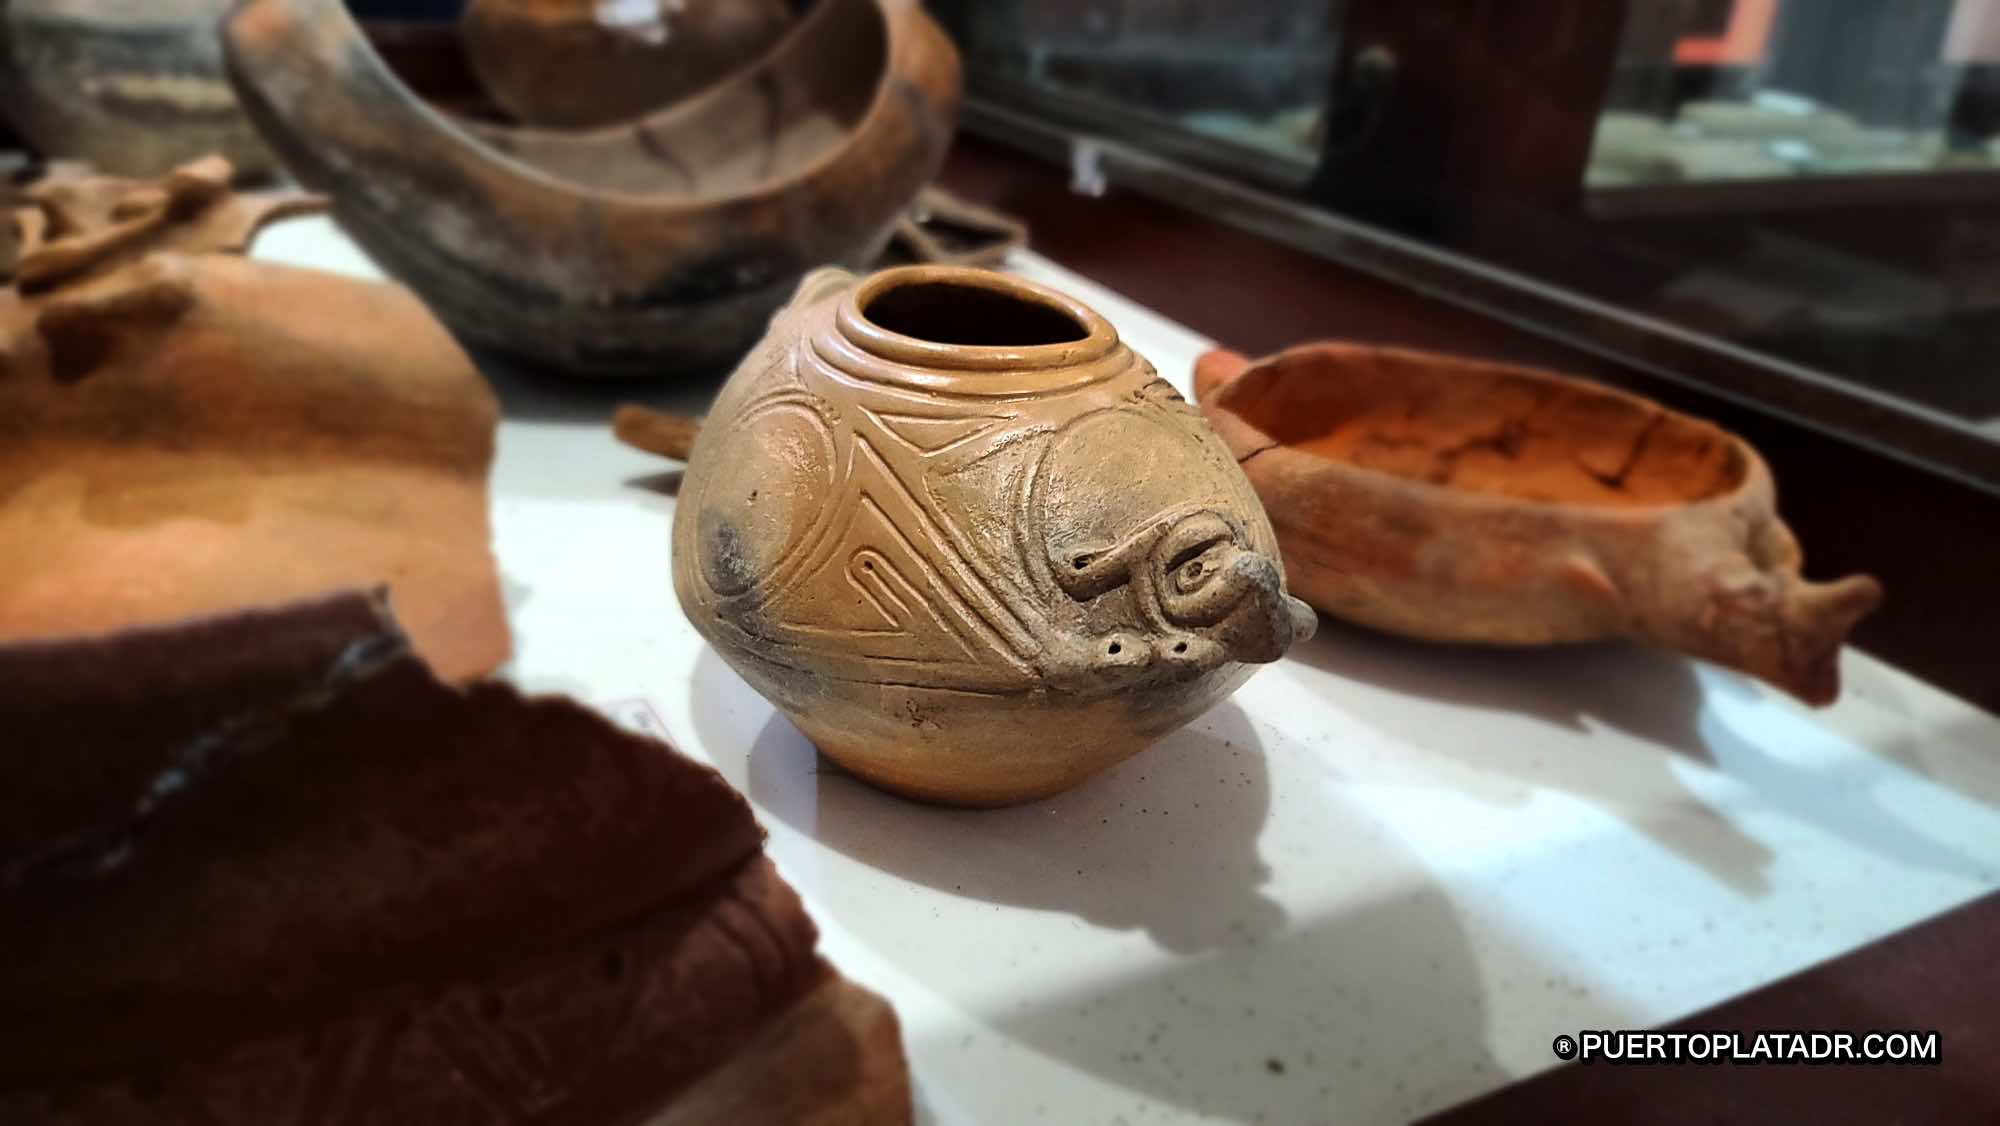 A Taino vase believed to be 500 years old.